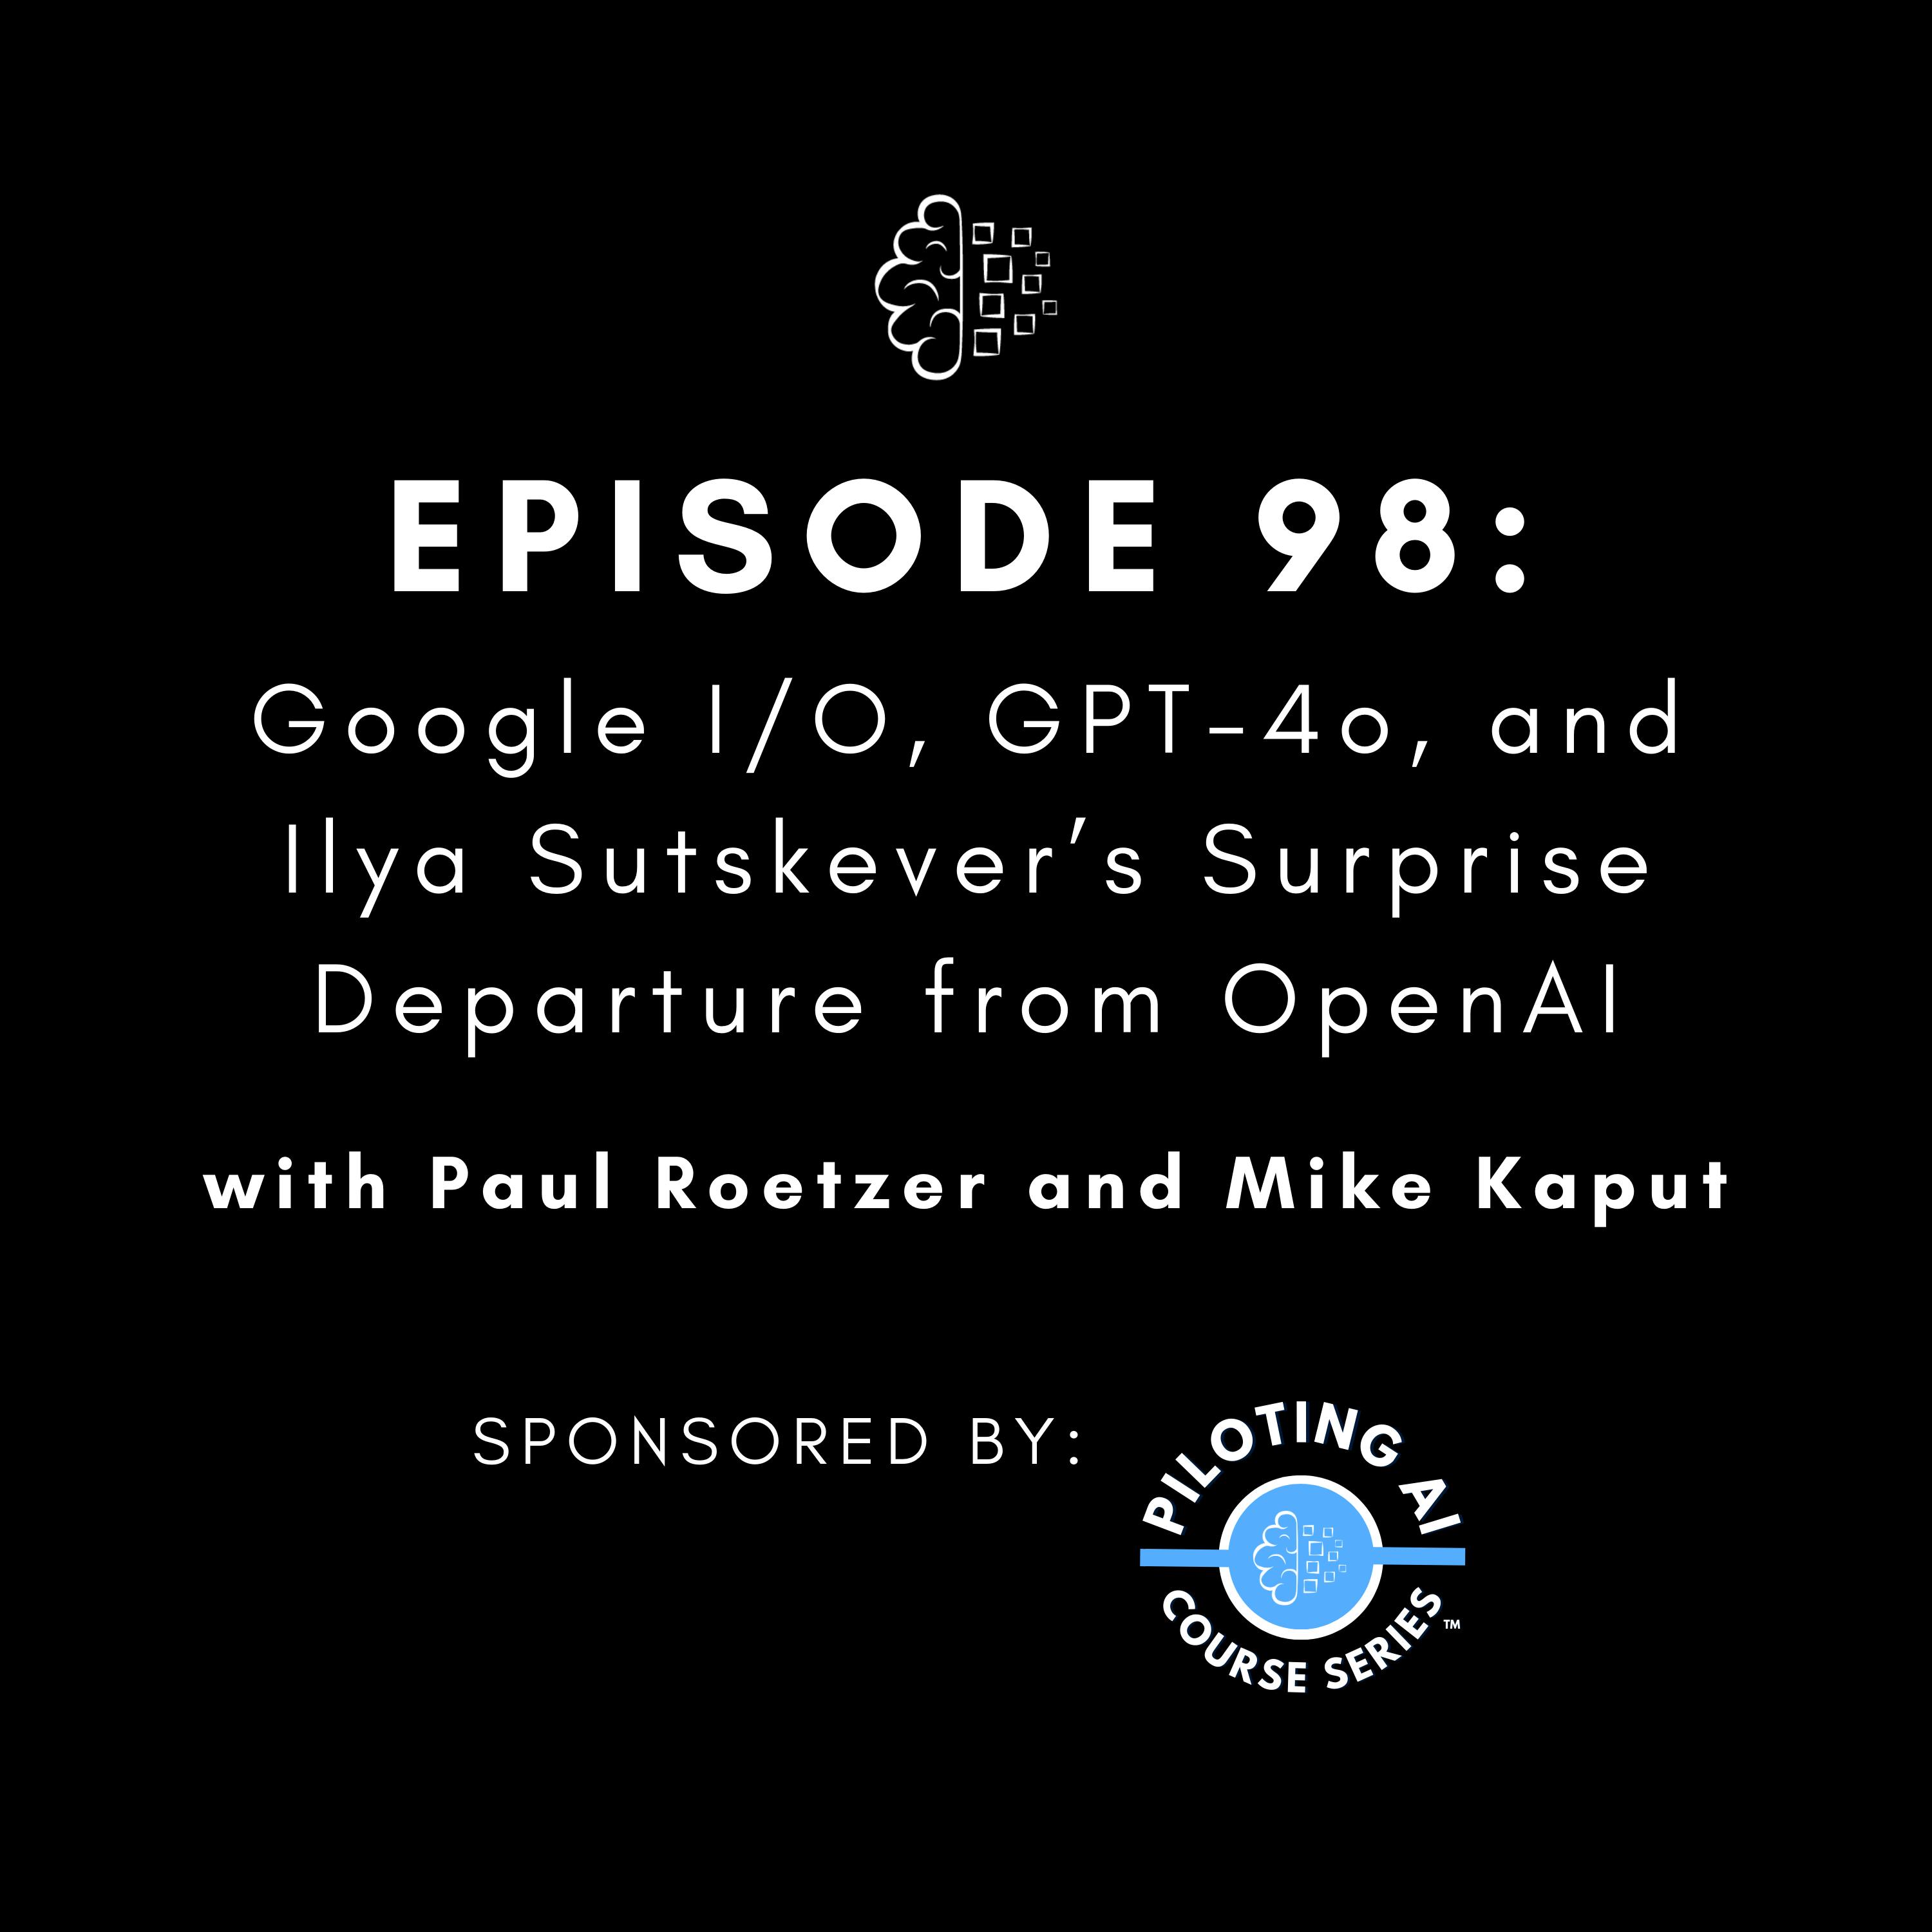 #98: Google I/O, GPT-4o, and Ilya Sutskever’s Surprise Departure from OpenAI